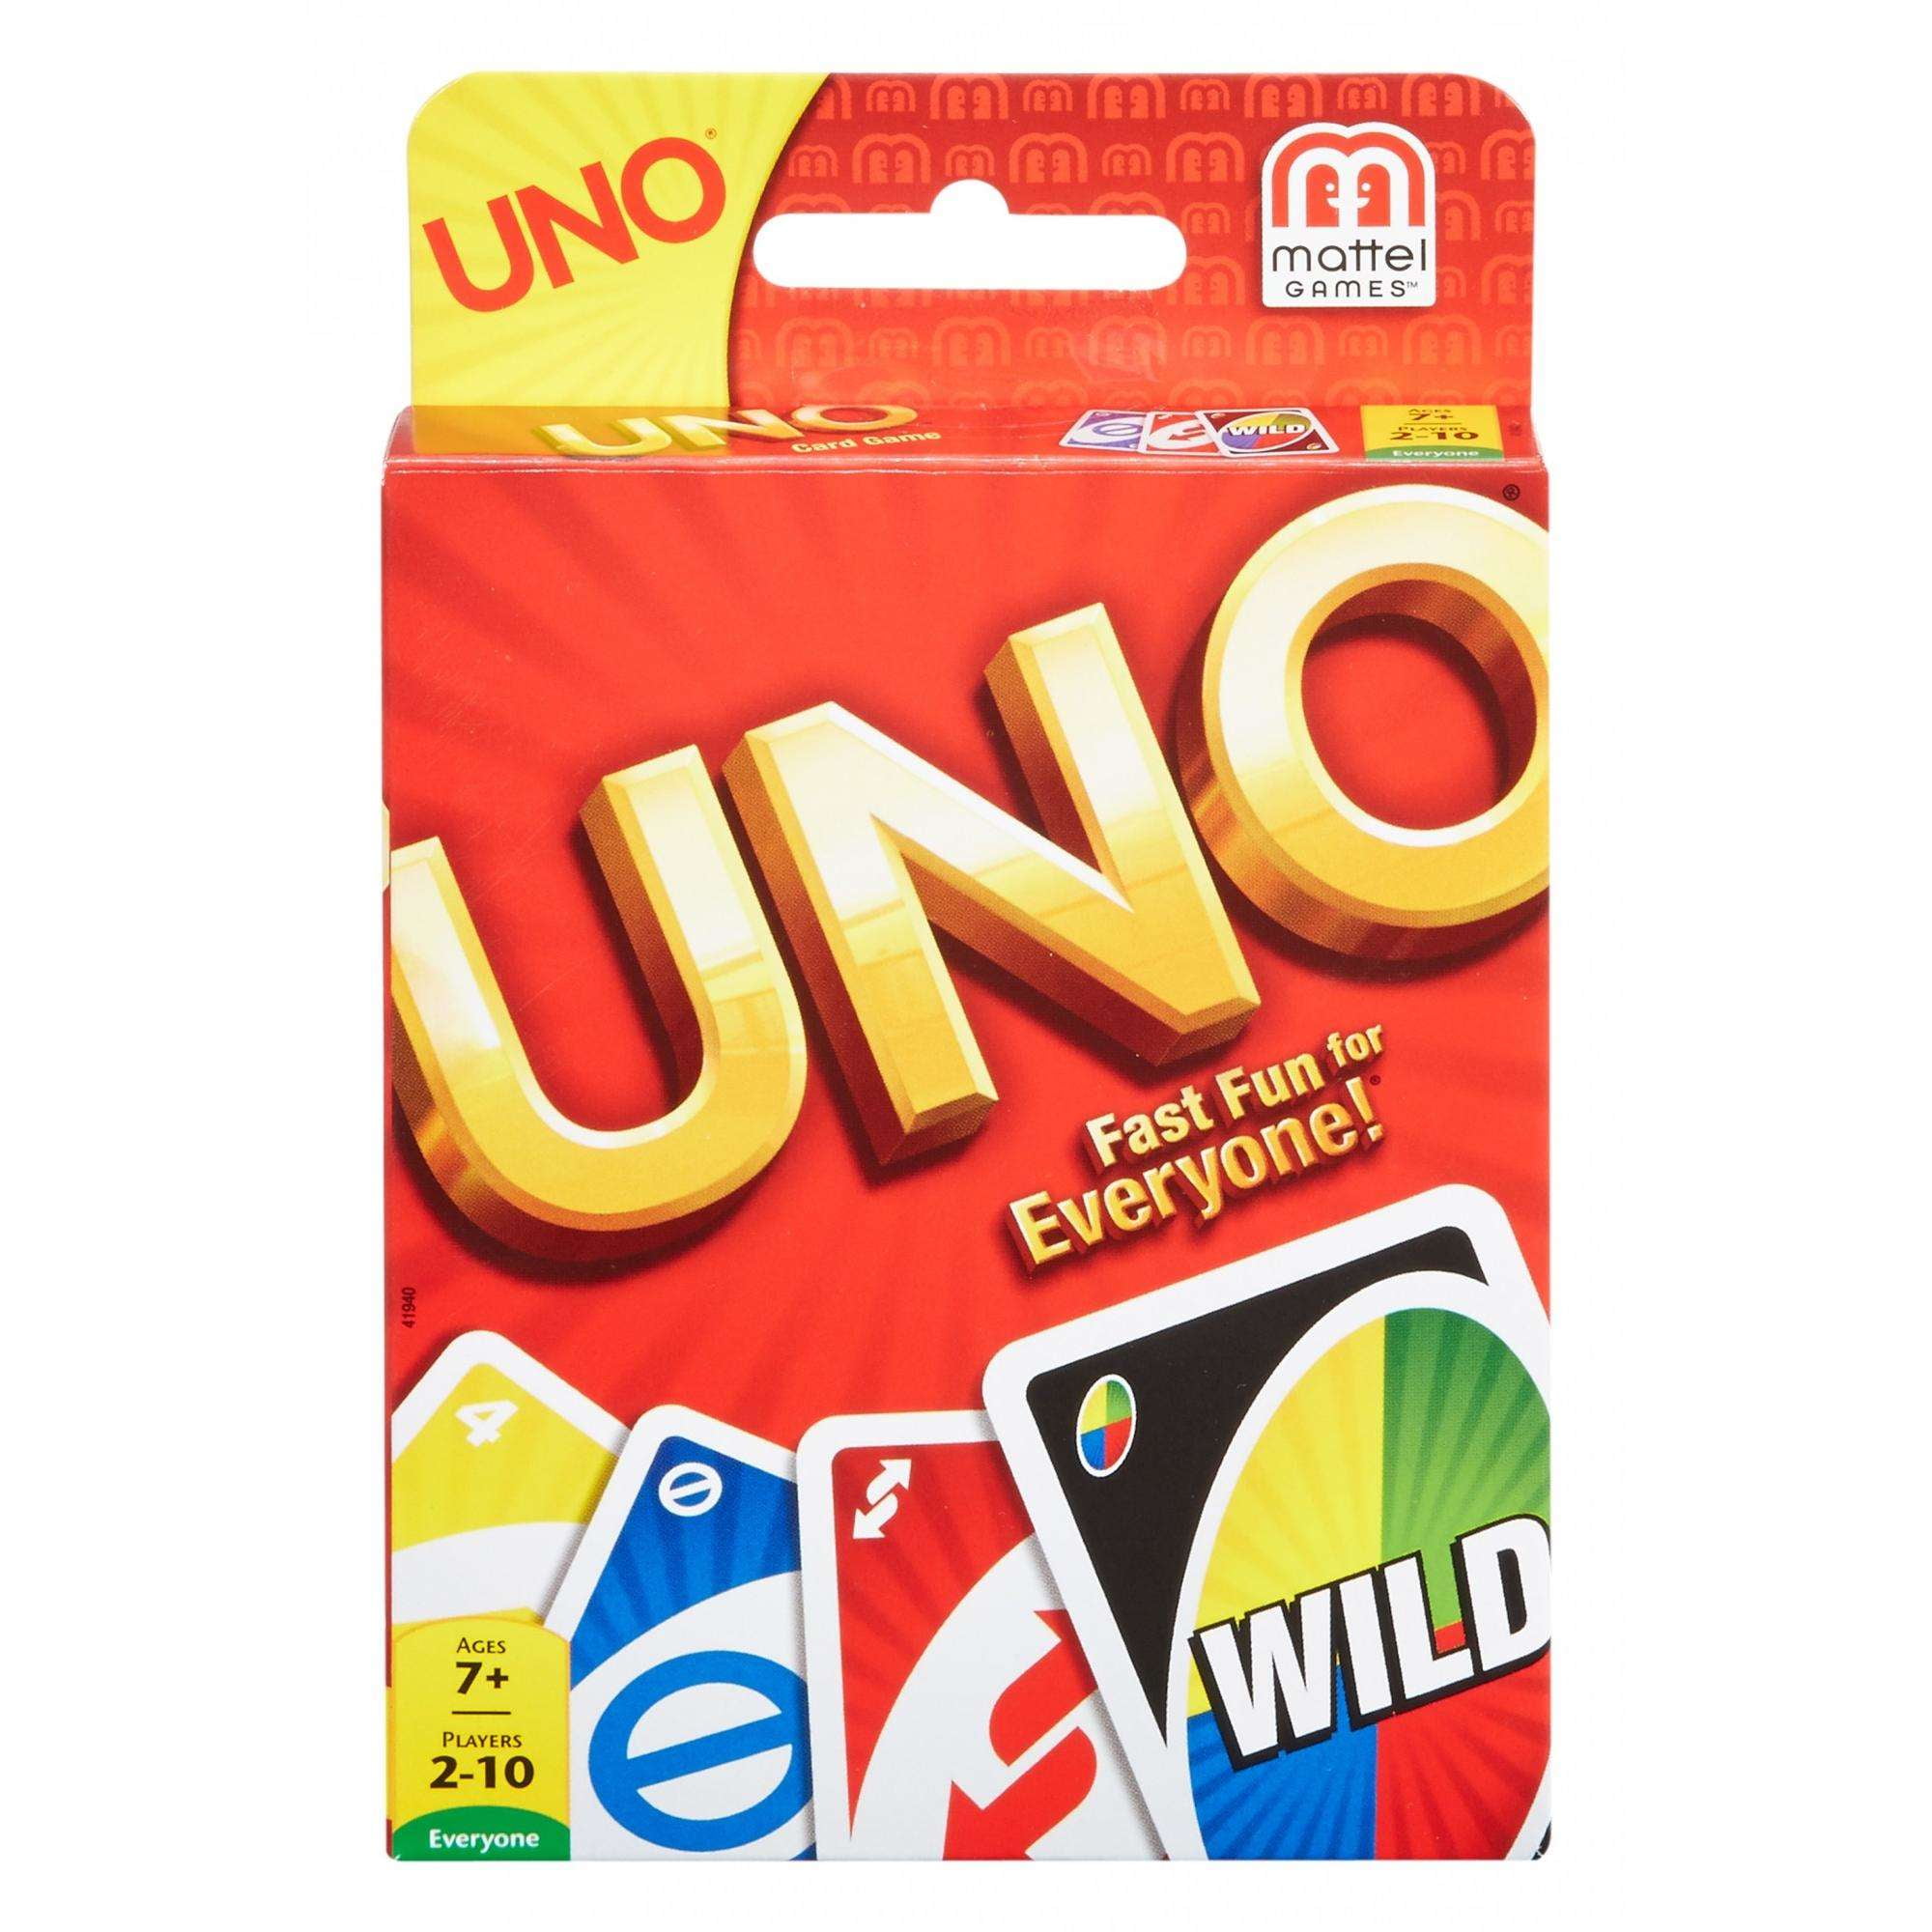 Ages 7+ Mattel Classic UNO Card Game for Kids and Adults Family Games 